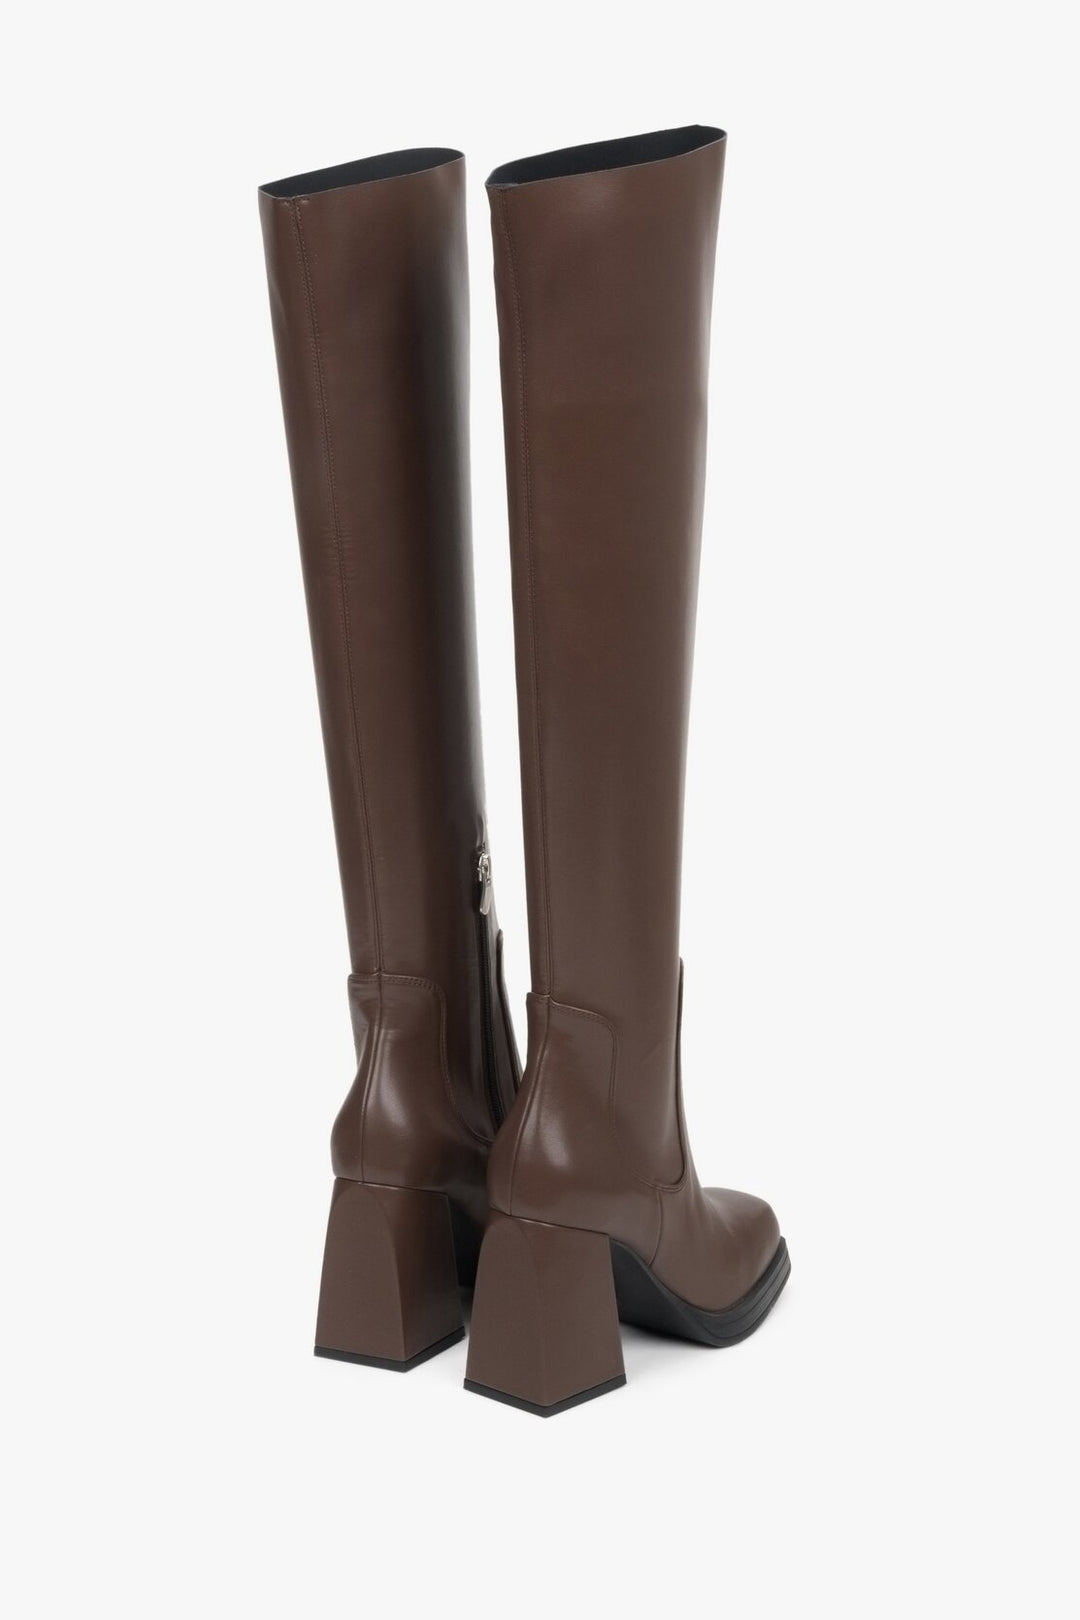 Elegant saddle brown women's boots genuine leather - presentation of a shoe toe and sideline.